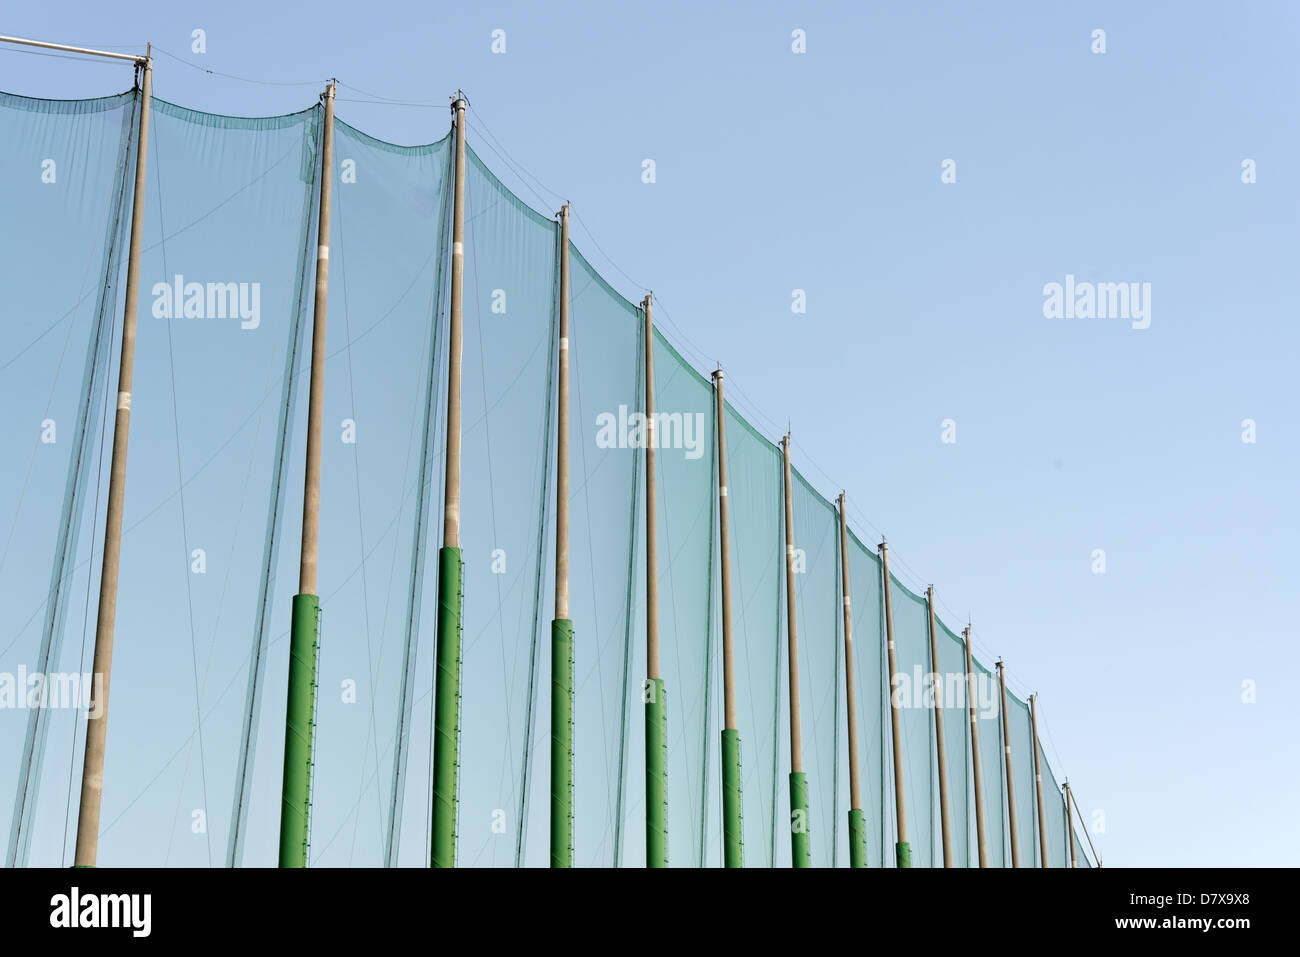 Safety net, to catch golf balls at a driving range Stock Photo